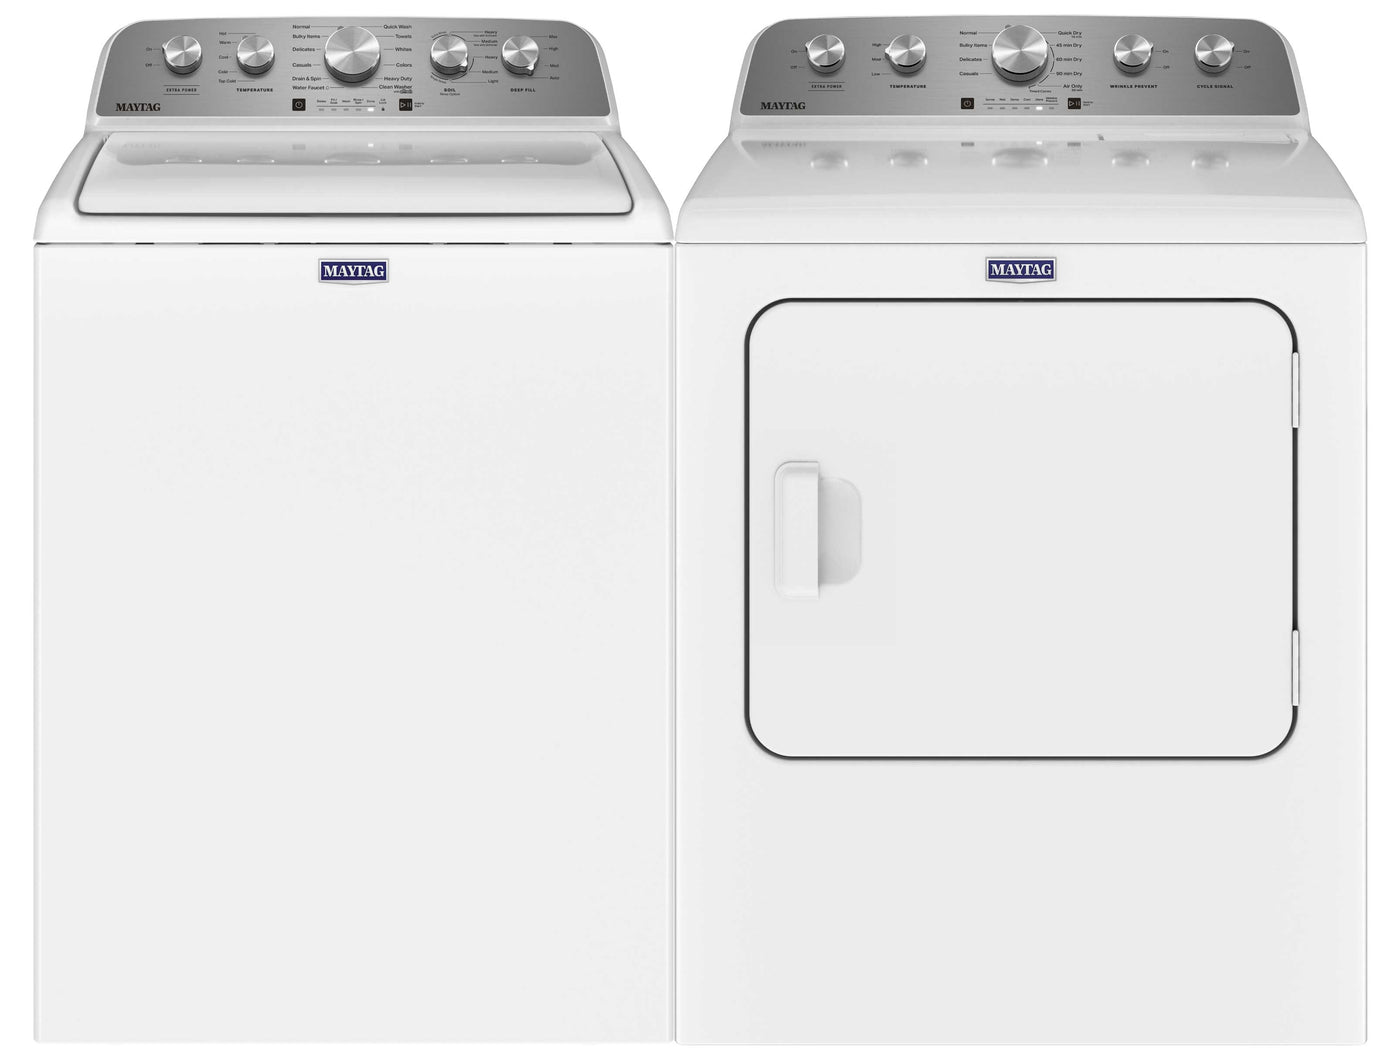 Maytag White Top-Load Washer (5.2 cu. ft.) & Electric Dryer (7.0 cu. ft.) - MVW5035MW/YMED5030MW